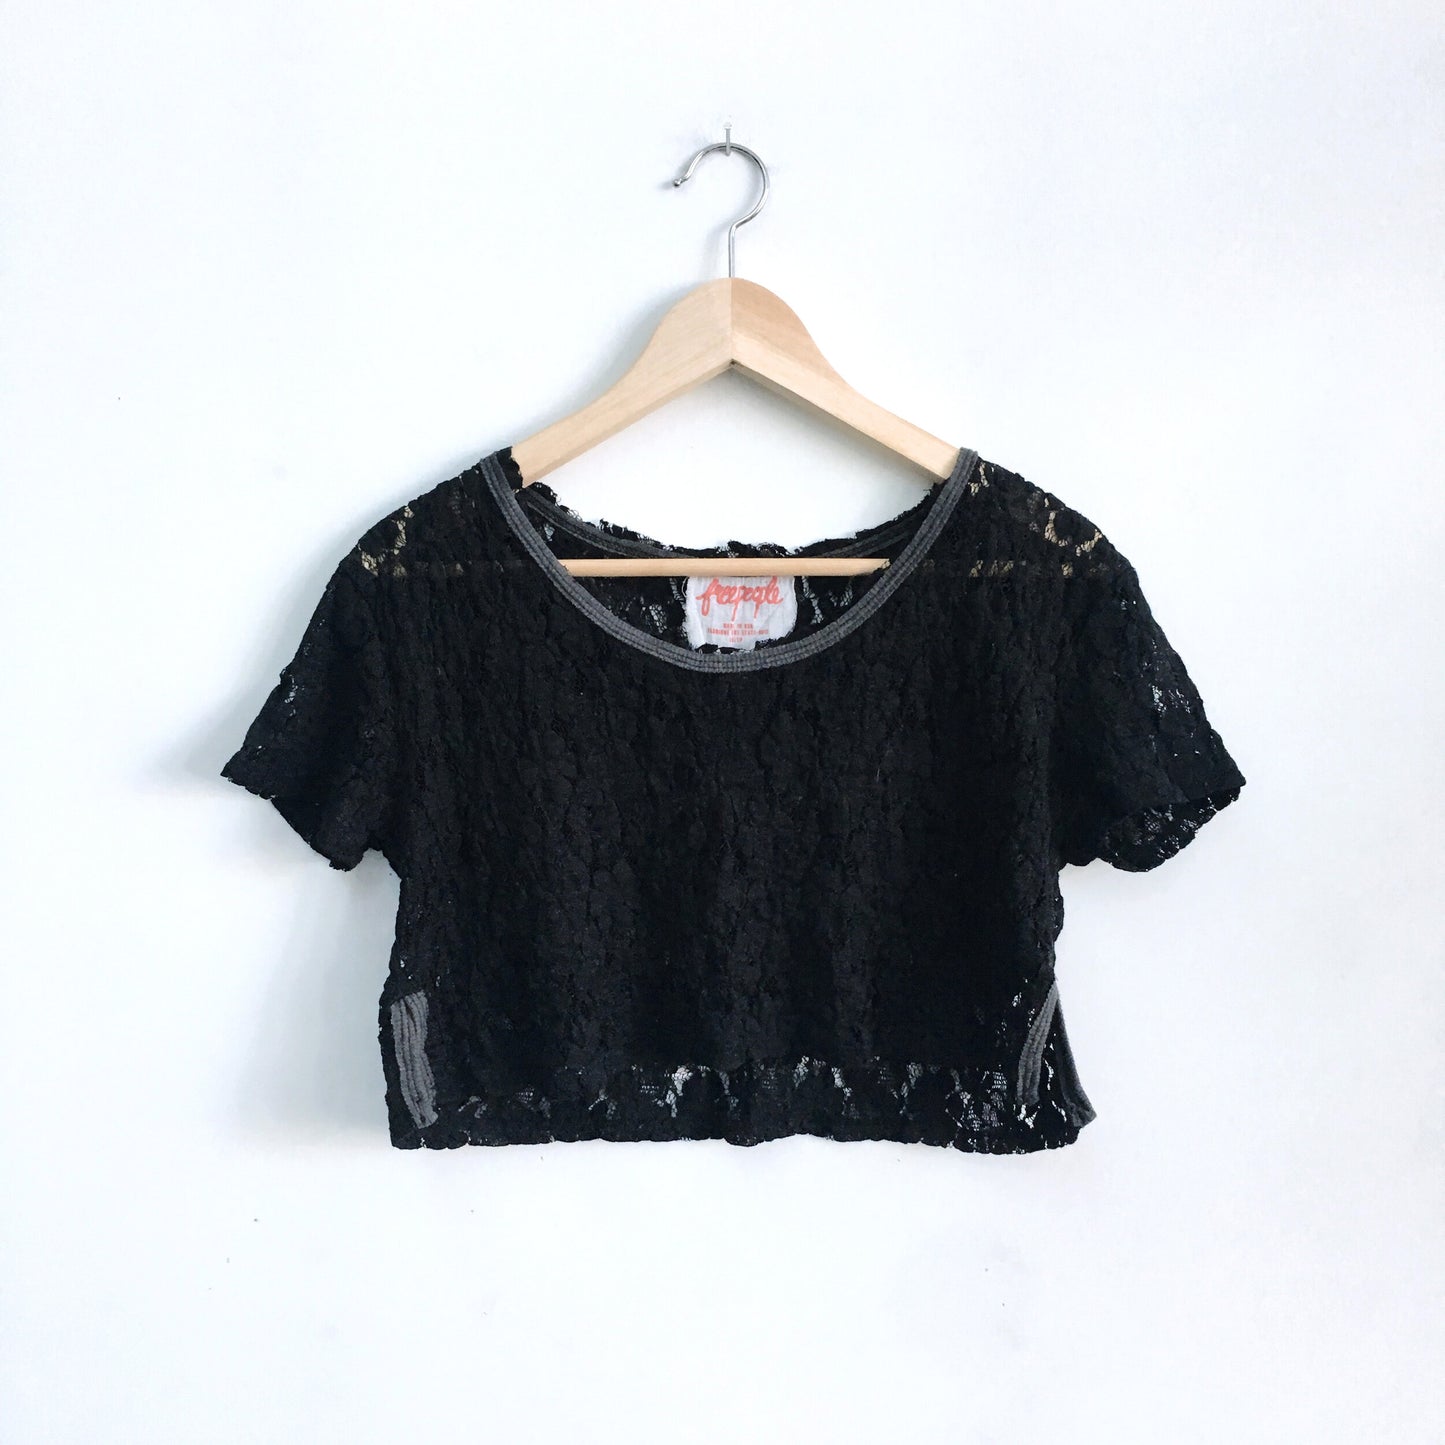 Free People stretch lace crop top - size xs